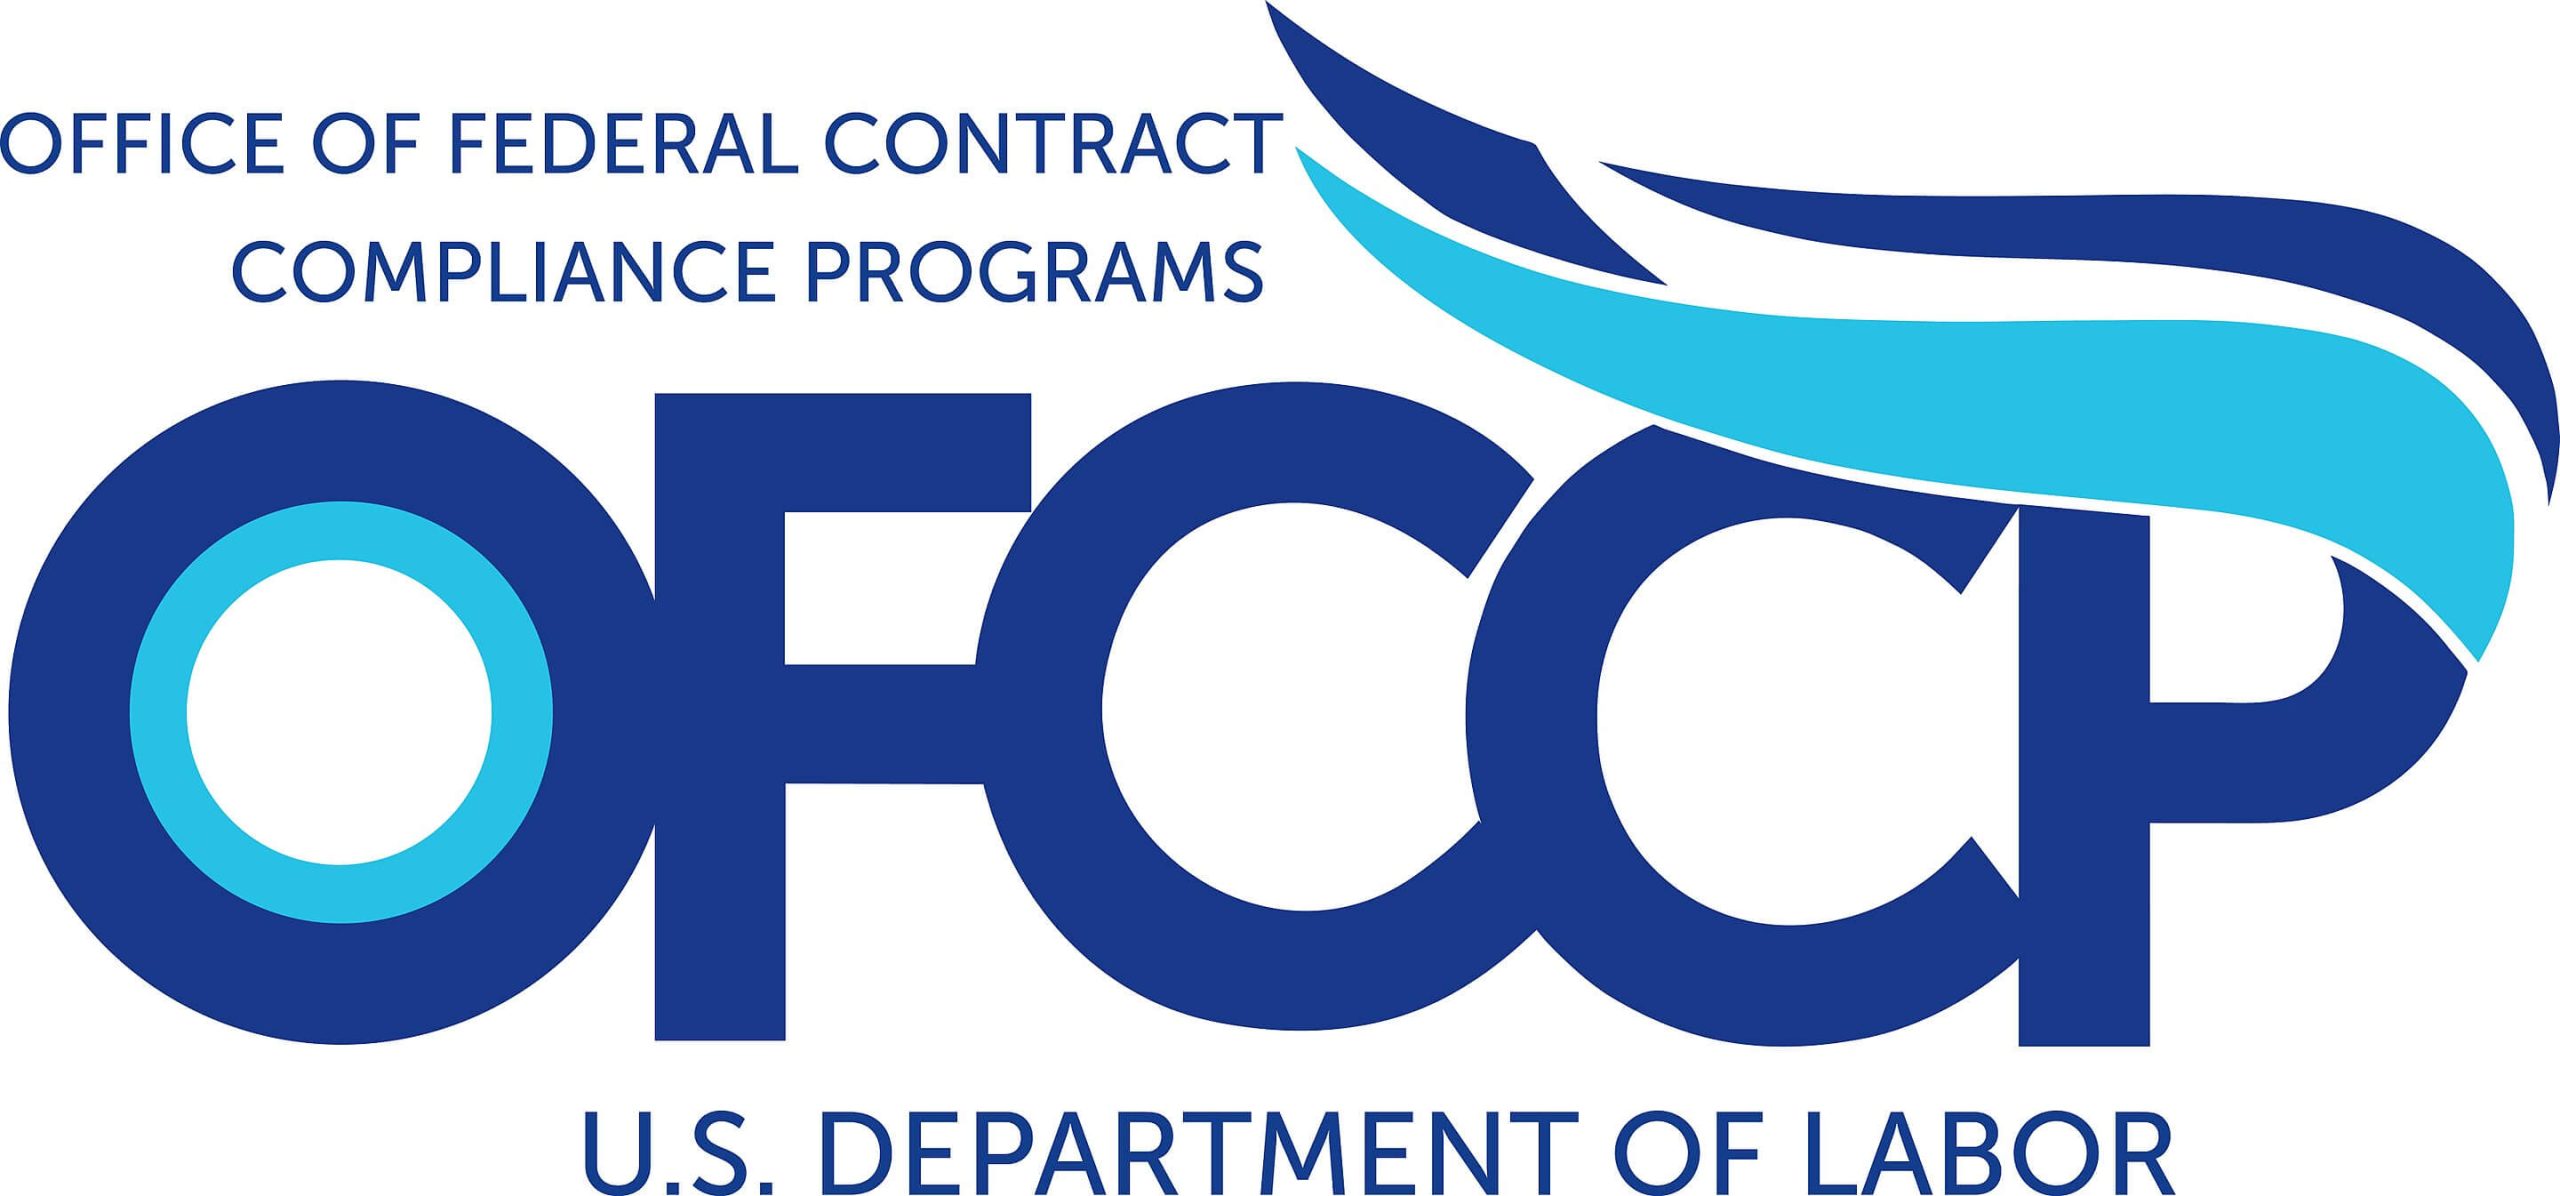 Office of Federal Contract Compliance Programs OFCCP U.S. Department of Labor